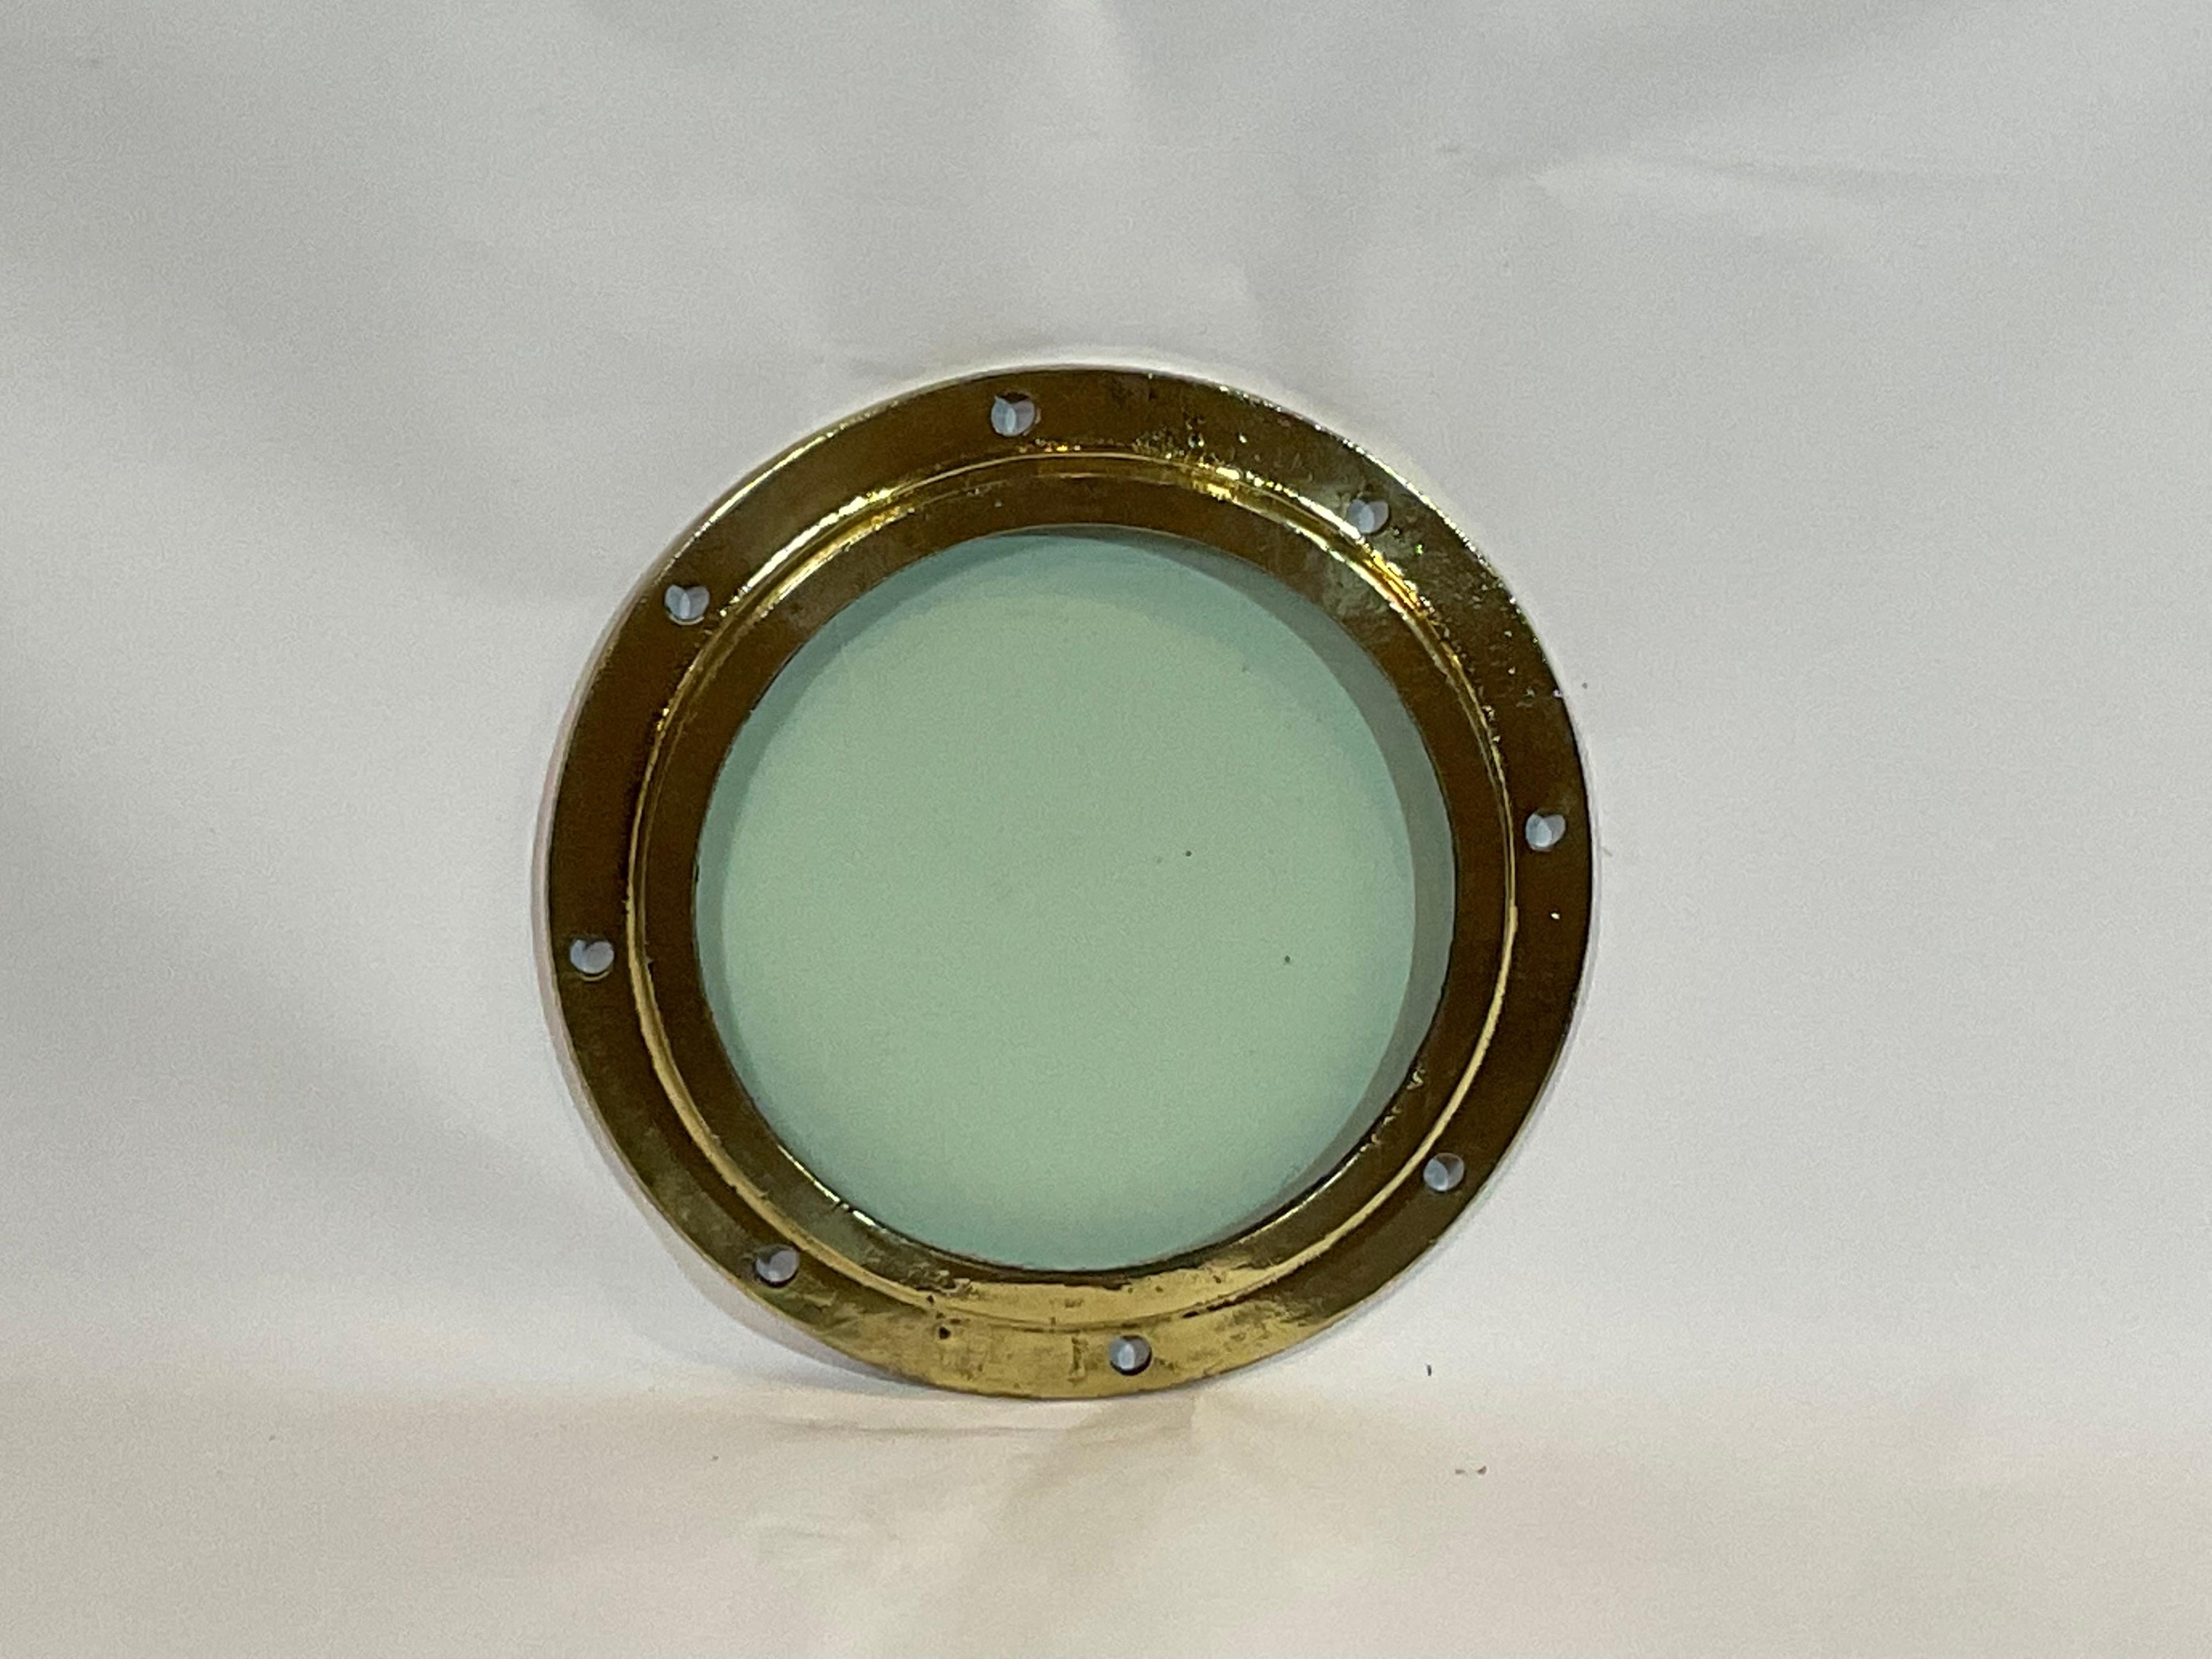 North American Solid Brass Ships Fixed Porthole For Sale